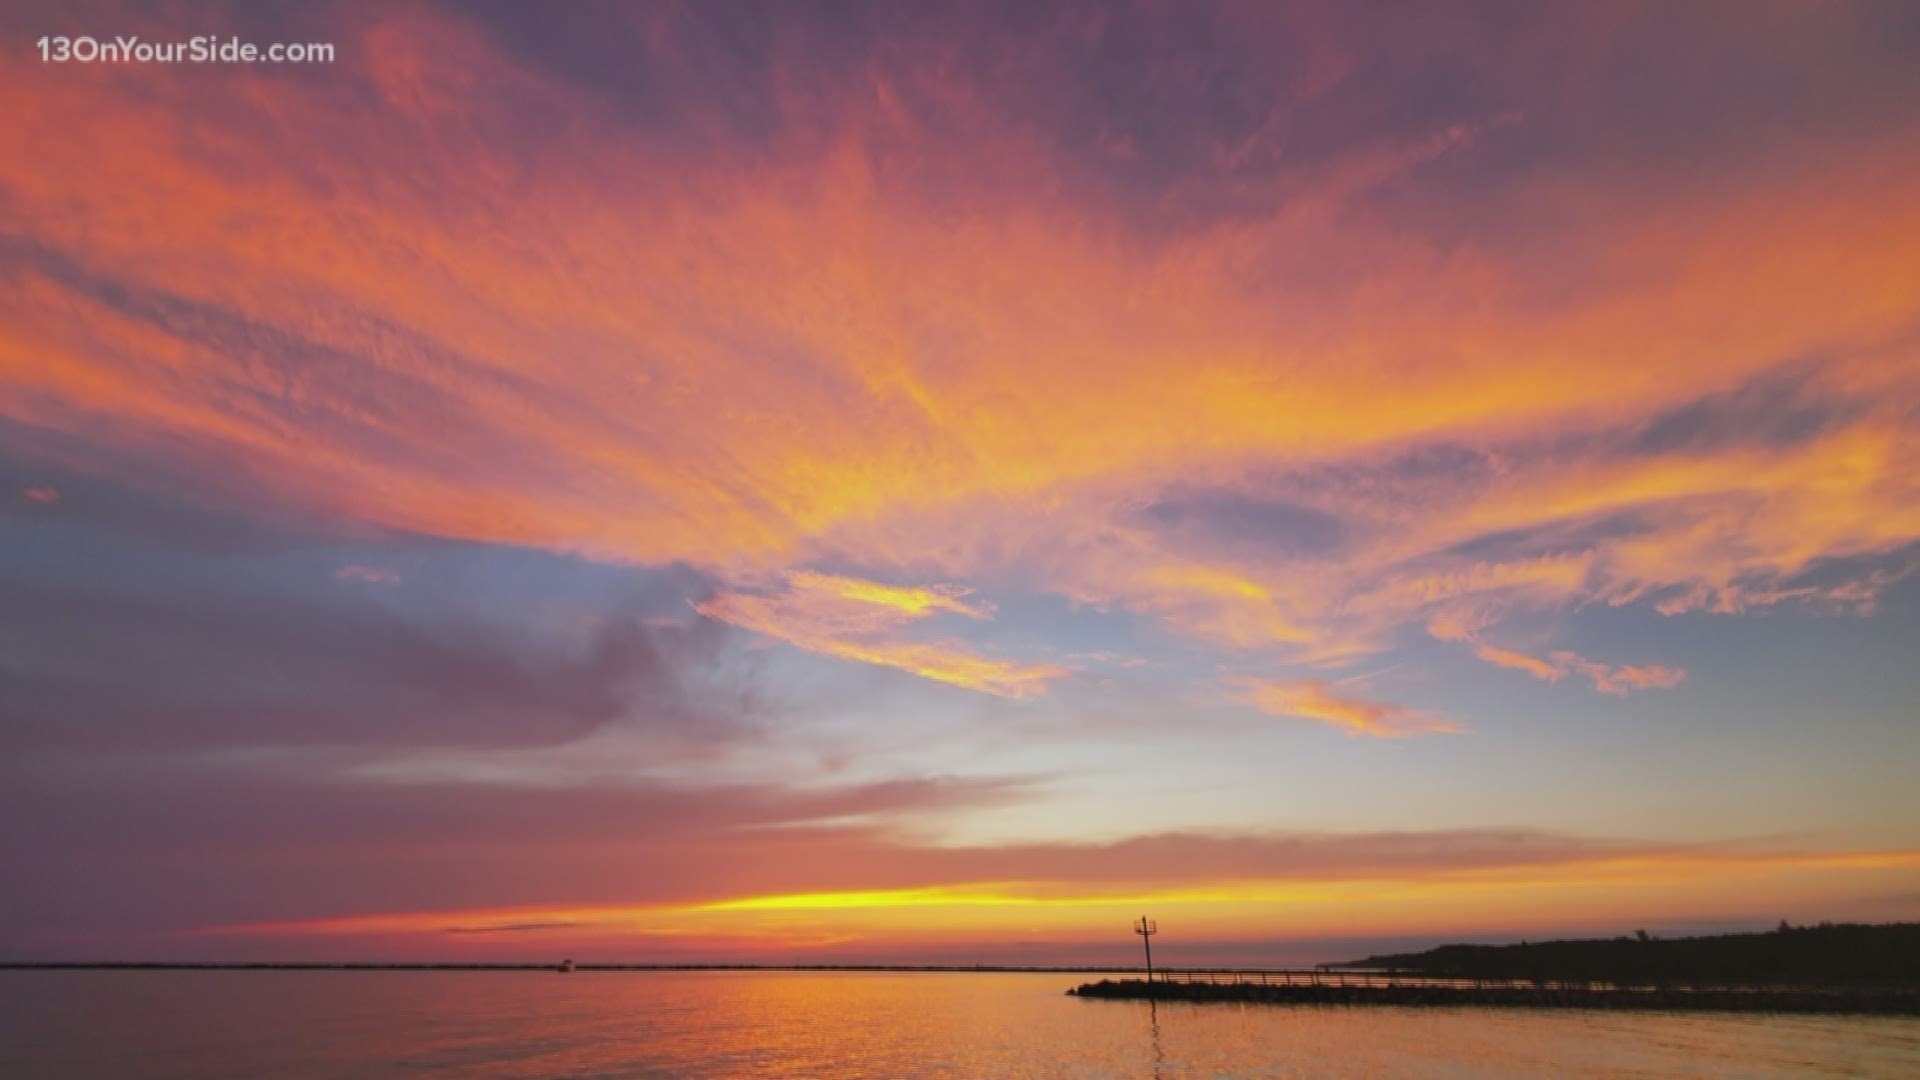 West Michigan has some of the best sunsets ever and when you see one you want to remember forever, don't fall trap to a sad sunset photo. Justin Stubleski from The Camera Shop of Muskegon shares tips for upping your game when it comes to capturing sunset photos.